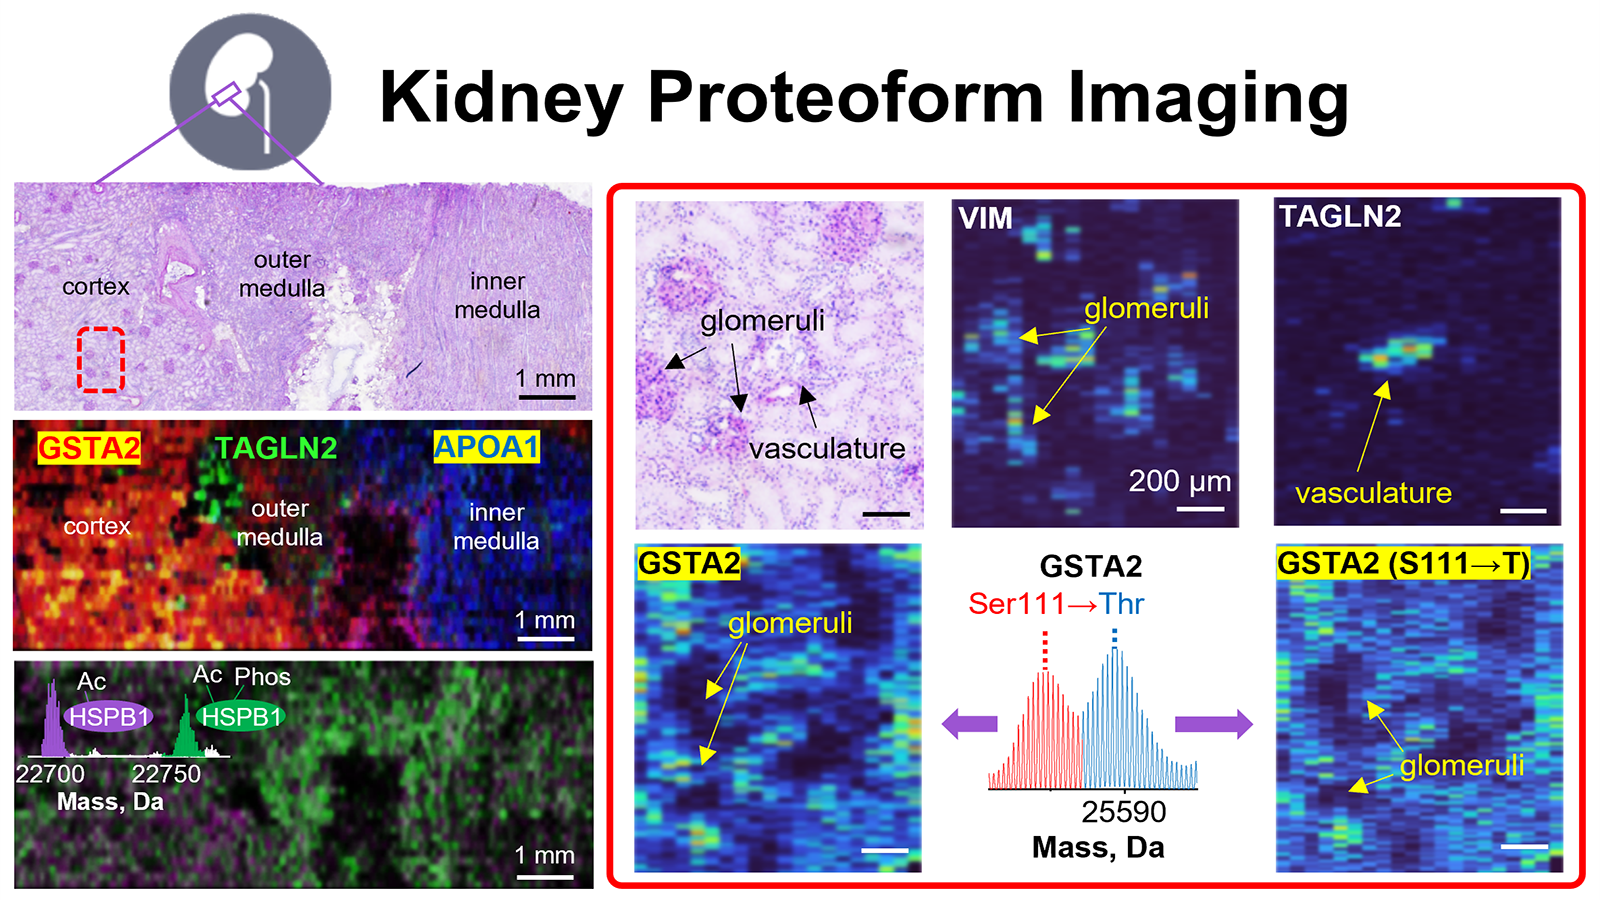 Collection of Proteoform imaging Mass Spectrometry (PiMS) images of human kidney with PAS-stained images for anatomical reference.  Glomeruli and vasculature are determined by the localization of the proteoforms.